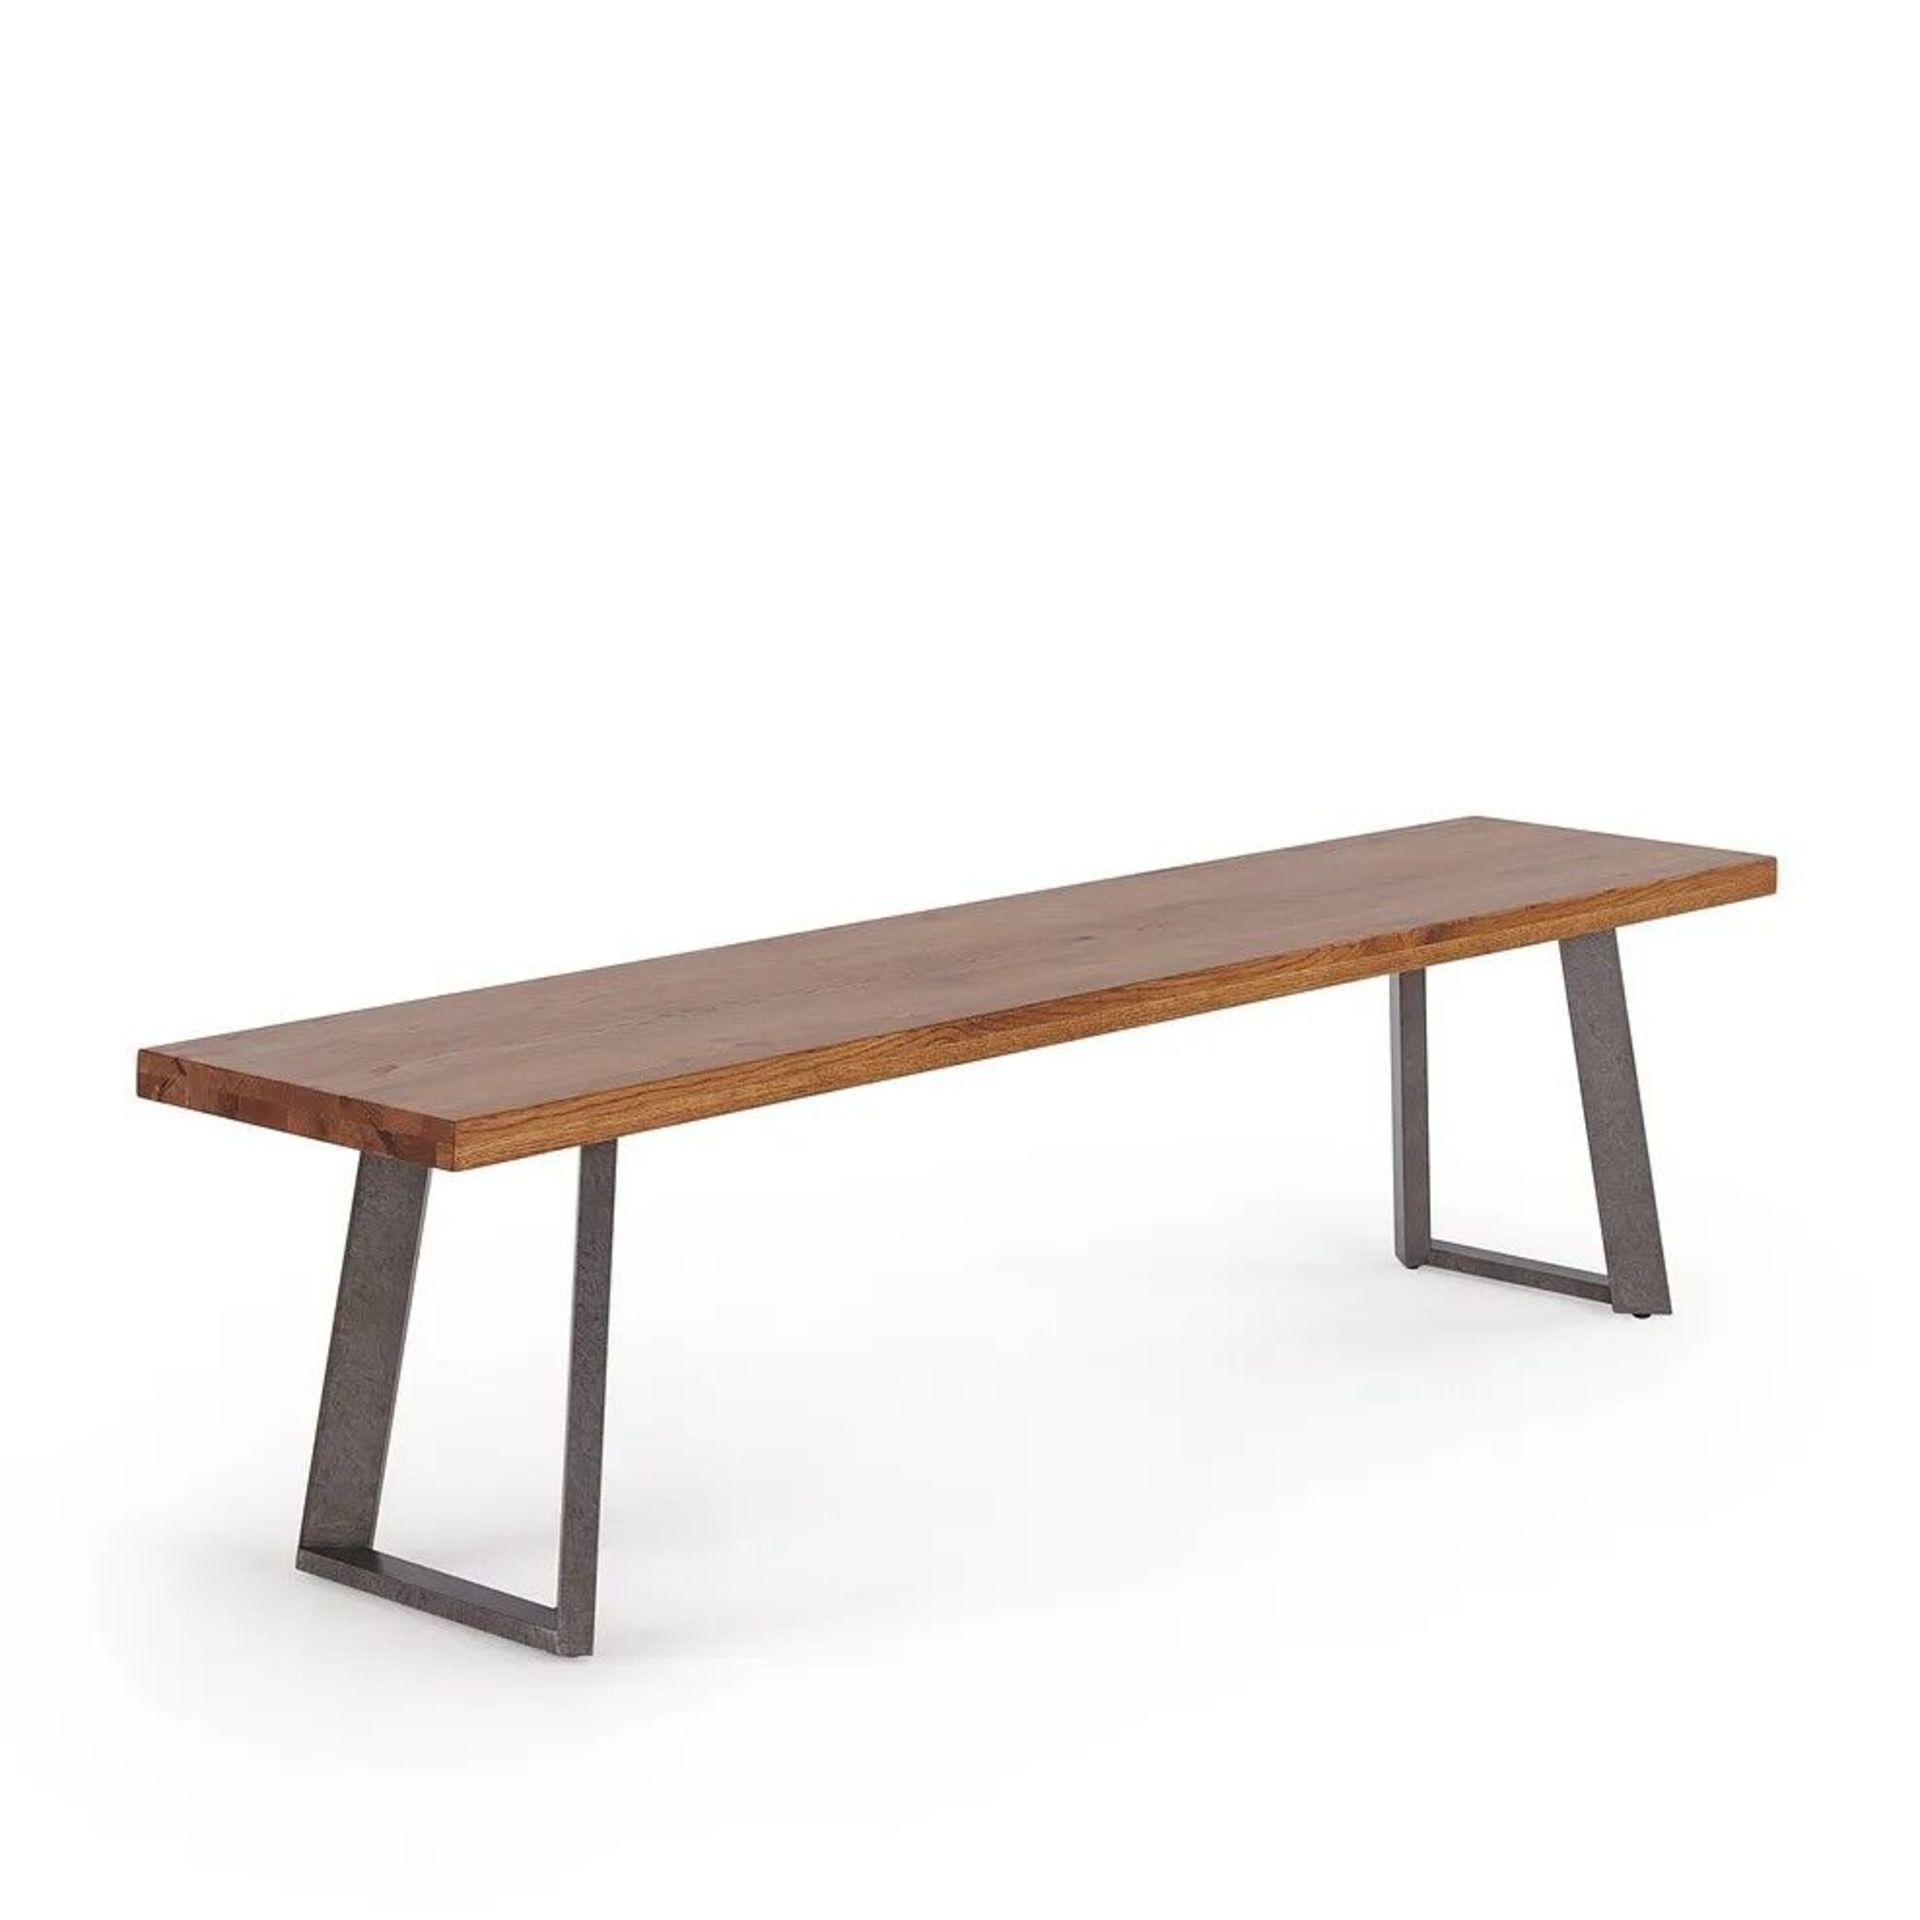 New Boxed - Cantilever Rustic Solid Oak & Metal Bench. 180cm Long. RRP £330. For a more open